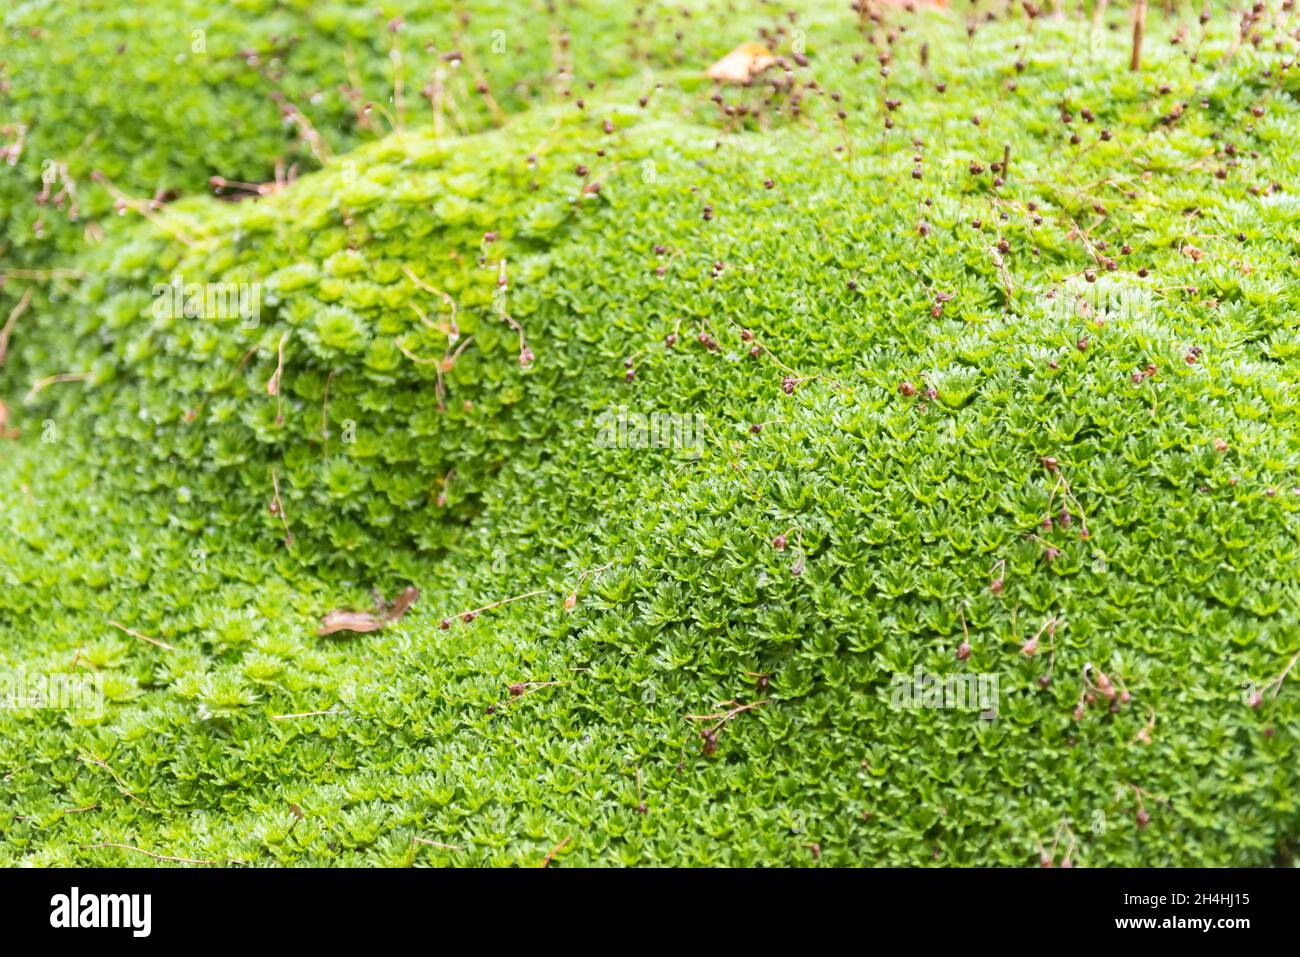 Saxifrage in autumn without flowers. Bright green saxifrage hills. Stock Photo